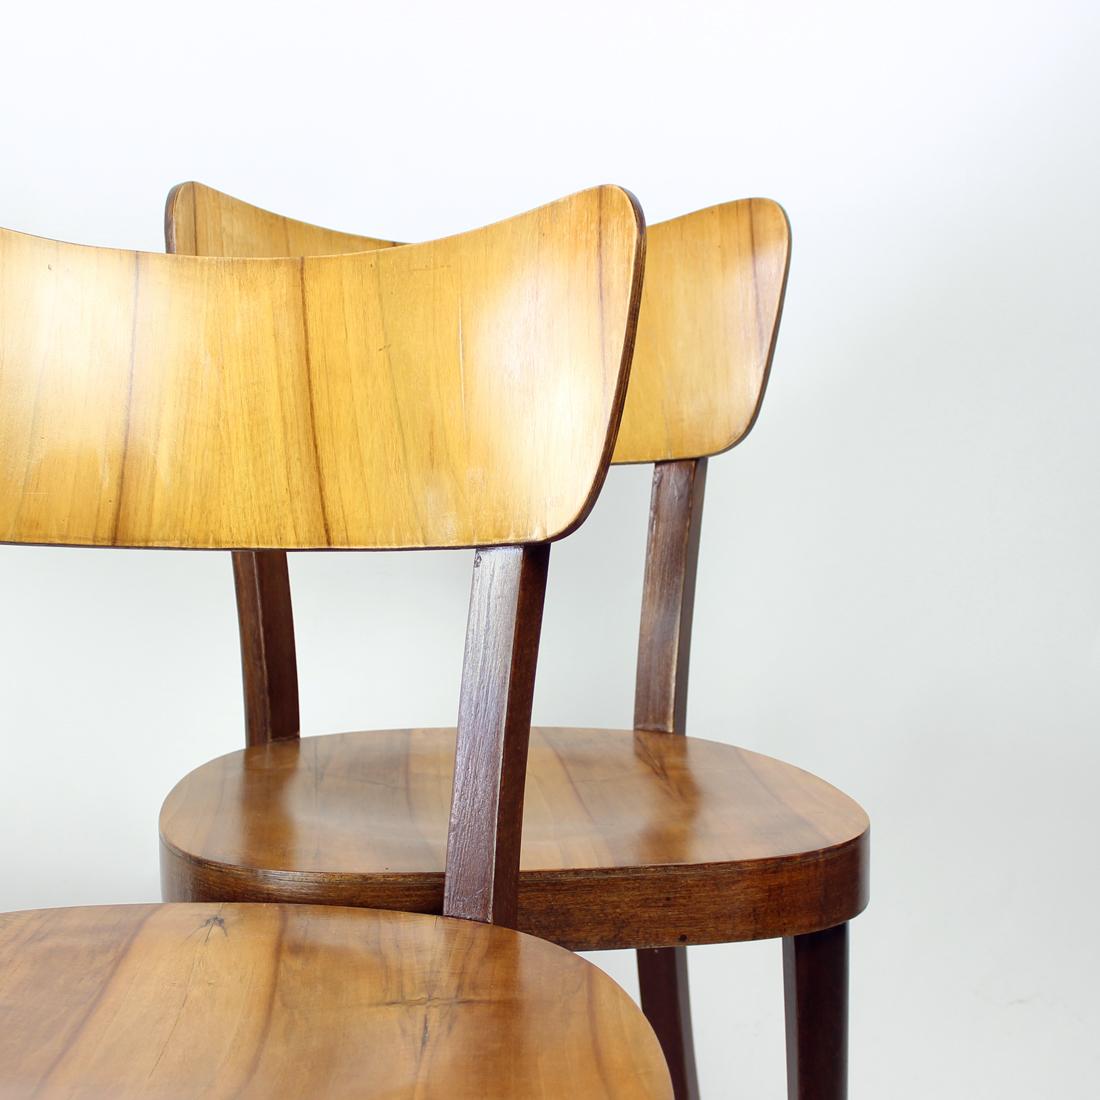 Mid-20th Century Set Of 4 Dining Chairs By Tatra In Walnut, Czechoslovakia 1950s For Sale